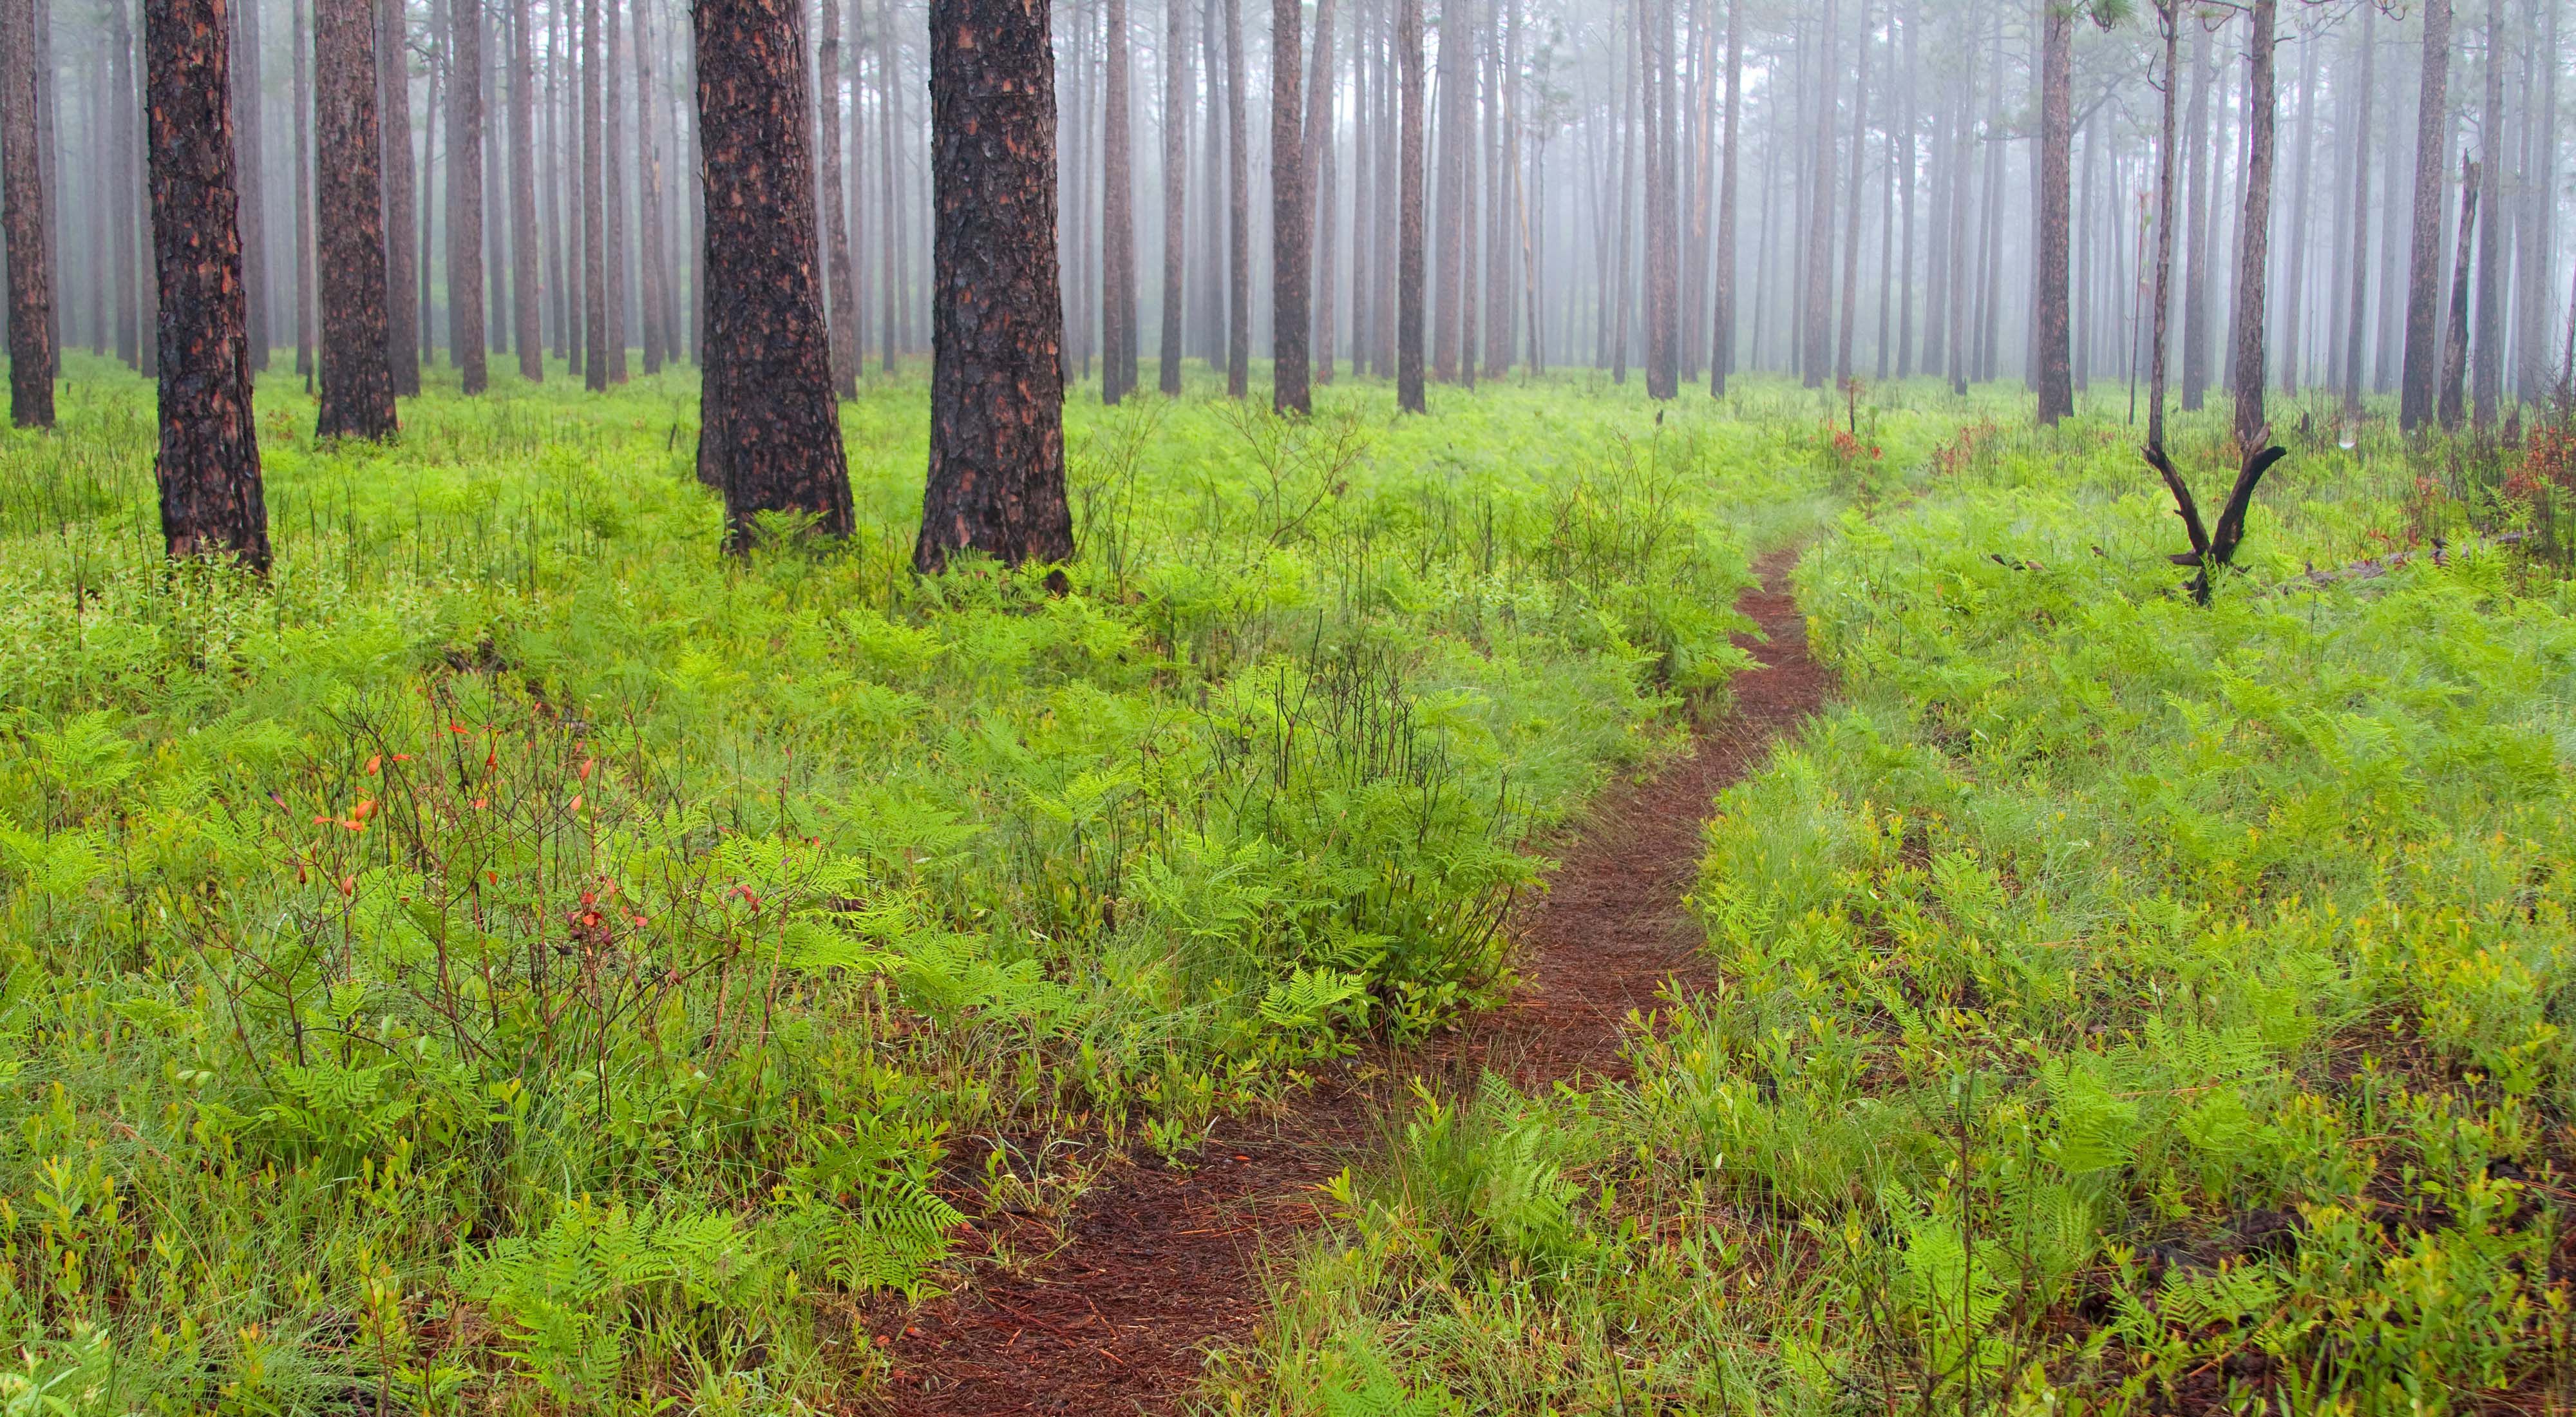 A trail through ferns and other undergrowth in a foggy pine forest.